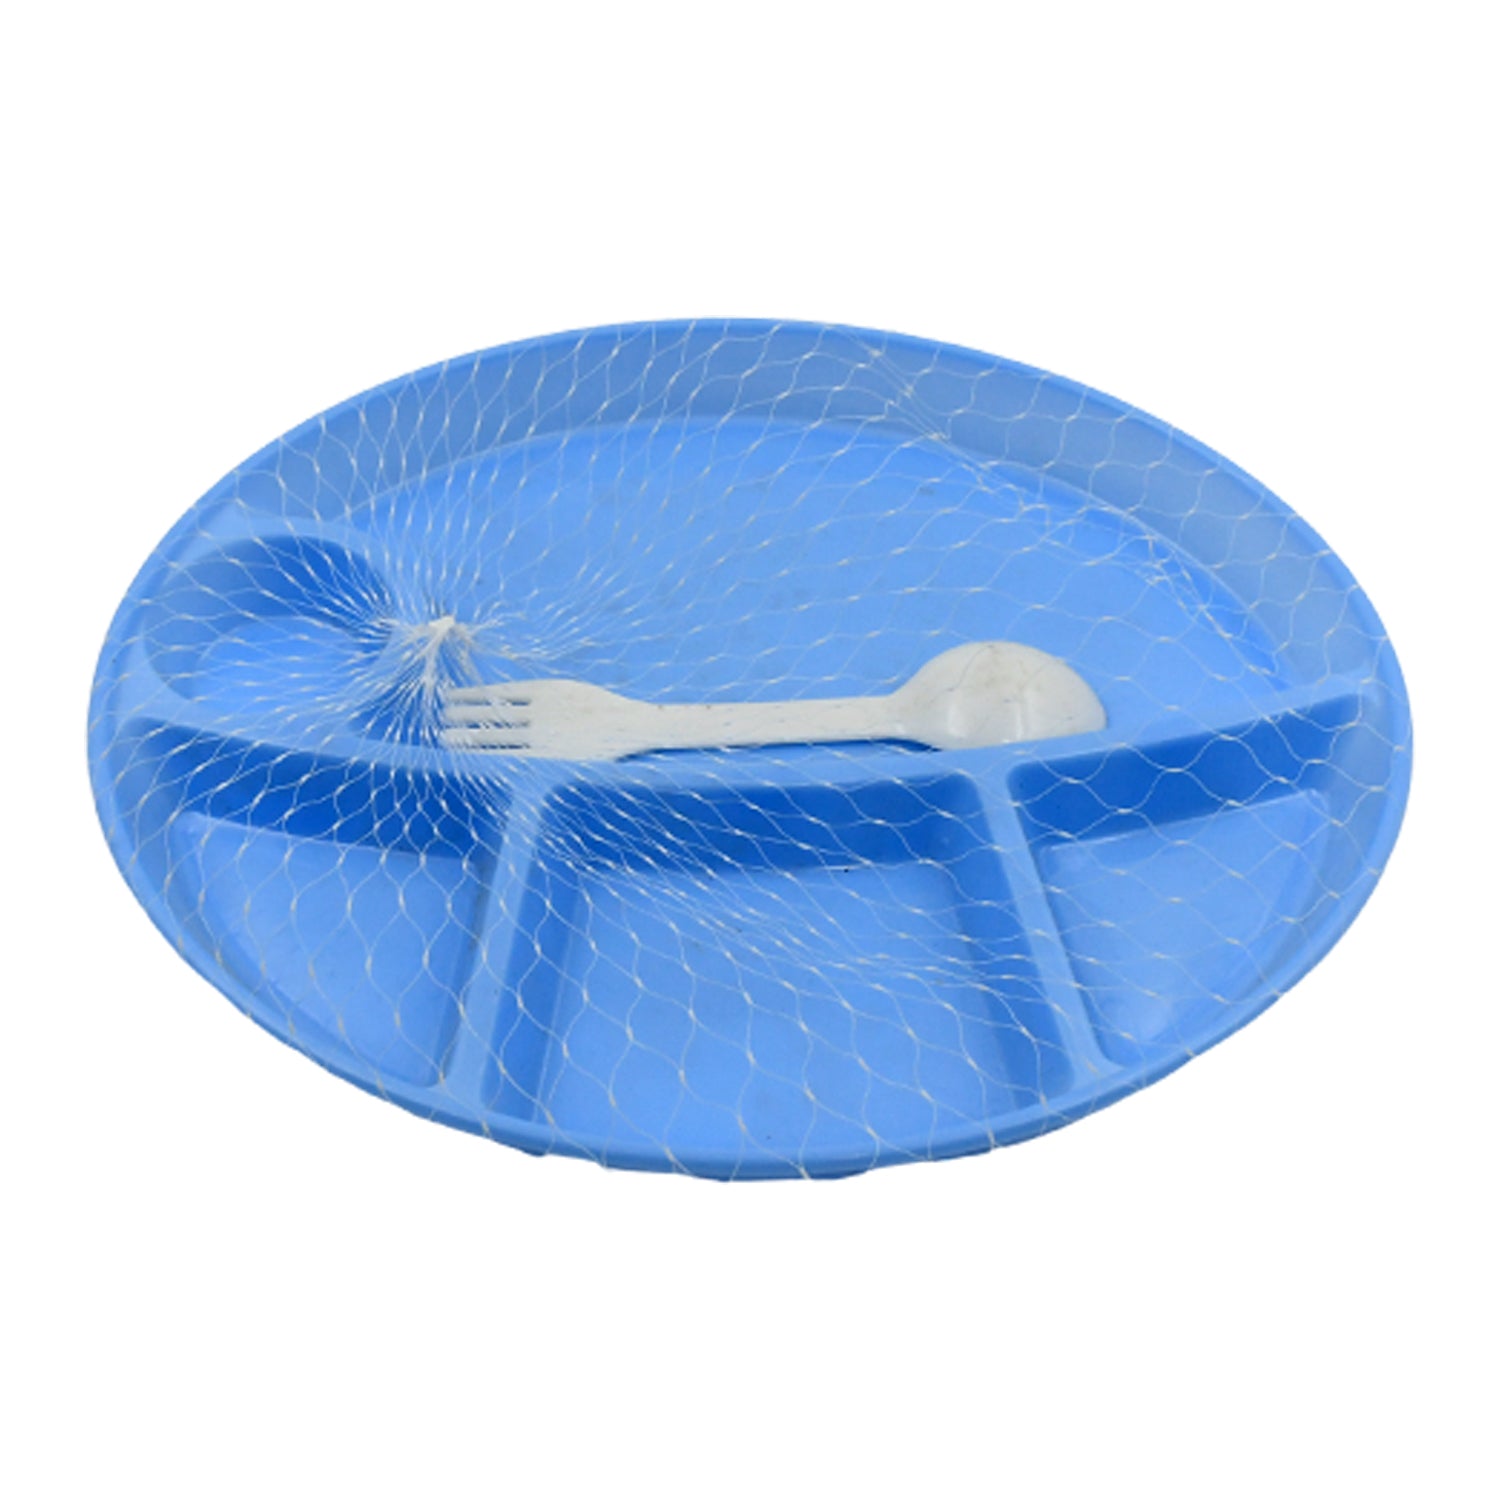 5577 Plastic Food Plates / Biodegradable 5 Compartment Plate With Spoon for Food Snacks / Nuts / Desserts Plates for Kids, Reusable Plates for Outdoor, Camping, BPA-free (1 Pc)